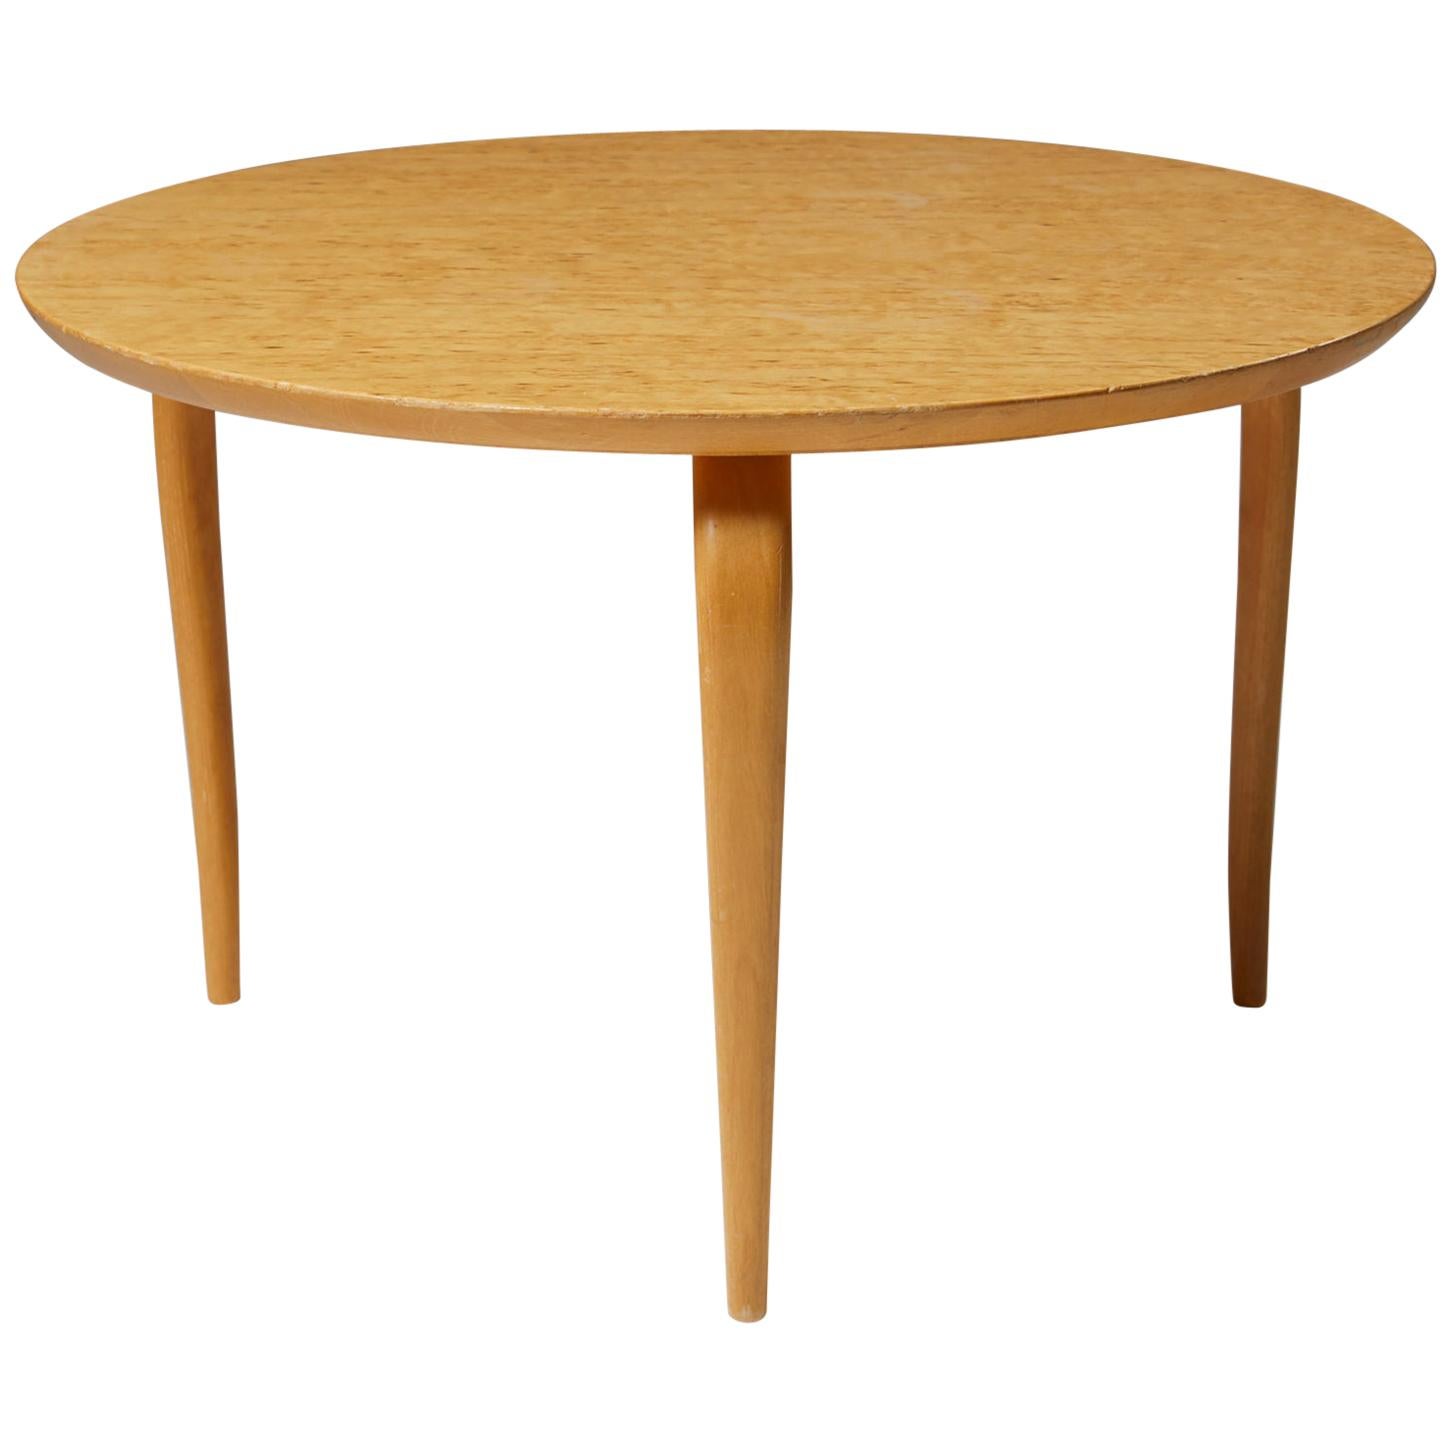 Occasional table Annika designed by Bruno Mathsson for Karl Mathsson